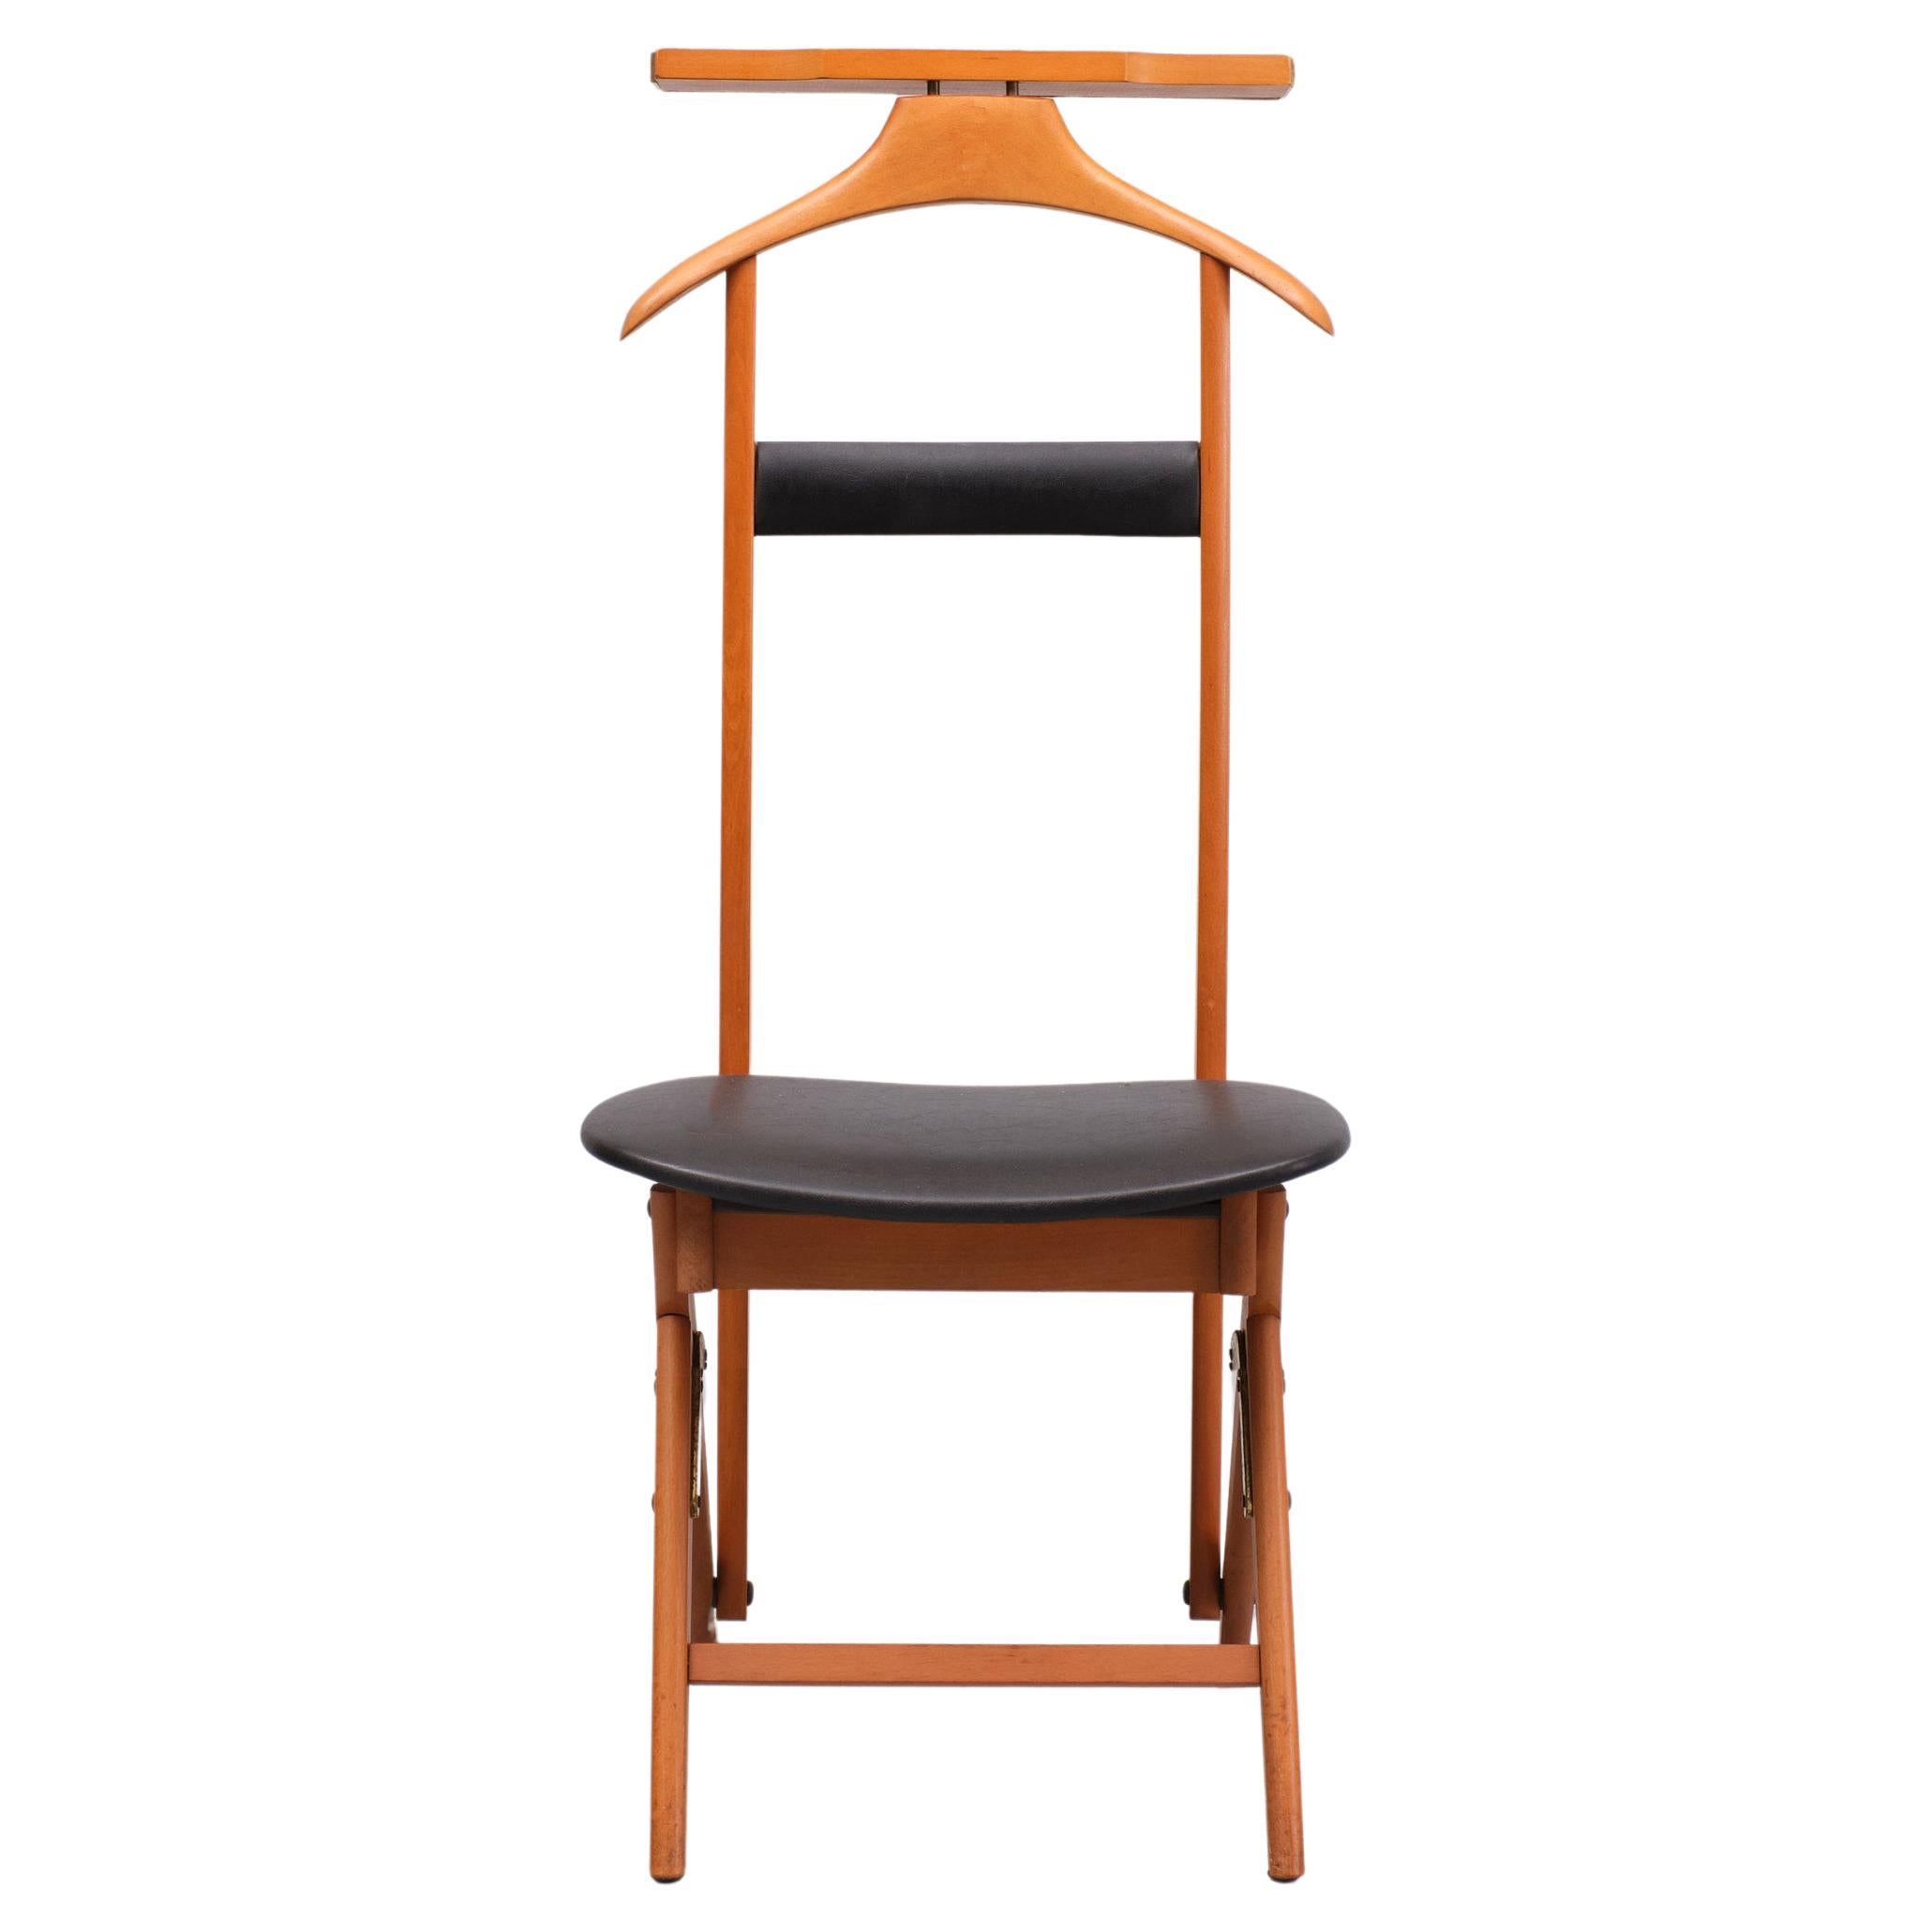 Very rare mid century design dressboy and chair in 1, a design by Ico & Luisa Parisi for Fratelli Reguitti Italy. Also called Valet chair. The bottom is marked with the logo/monogram 'FR - Brevettato - Made in Italy' (see photo) Period: 1960s.